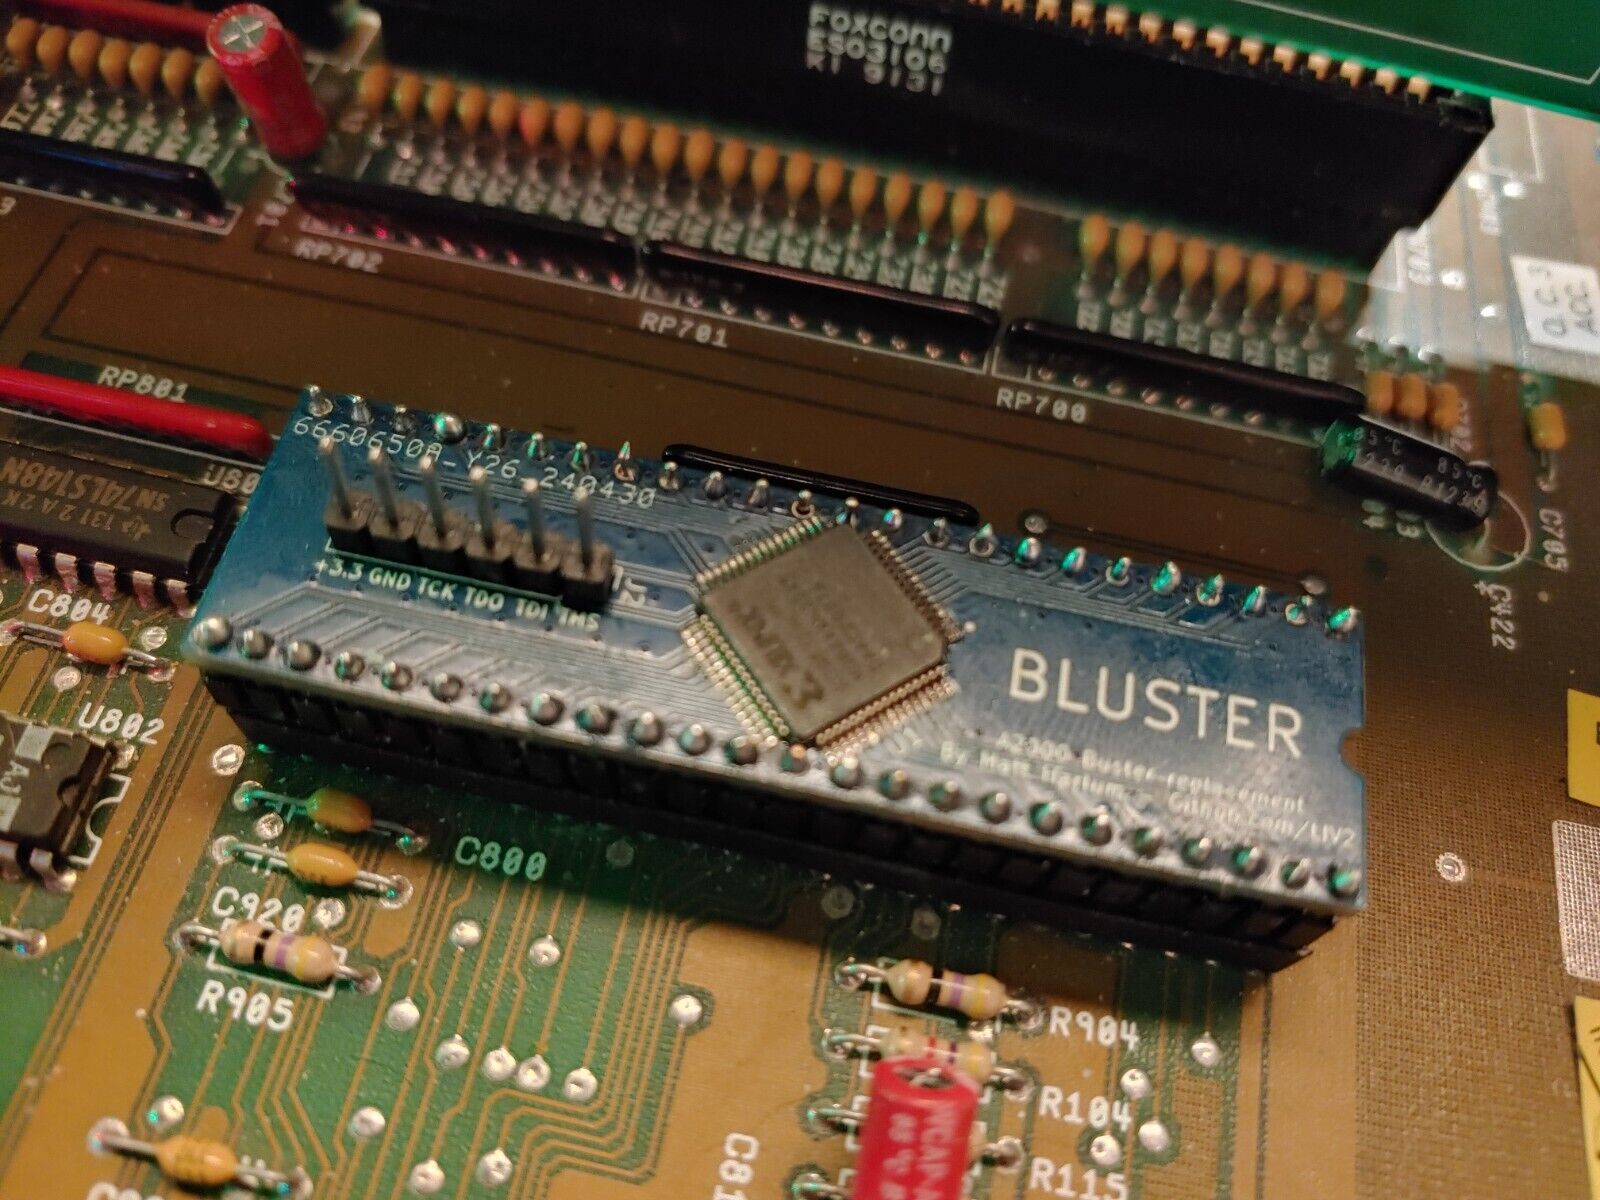 Bluster CPLD Amiga Buster replacement